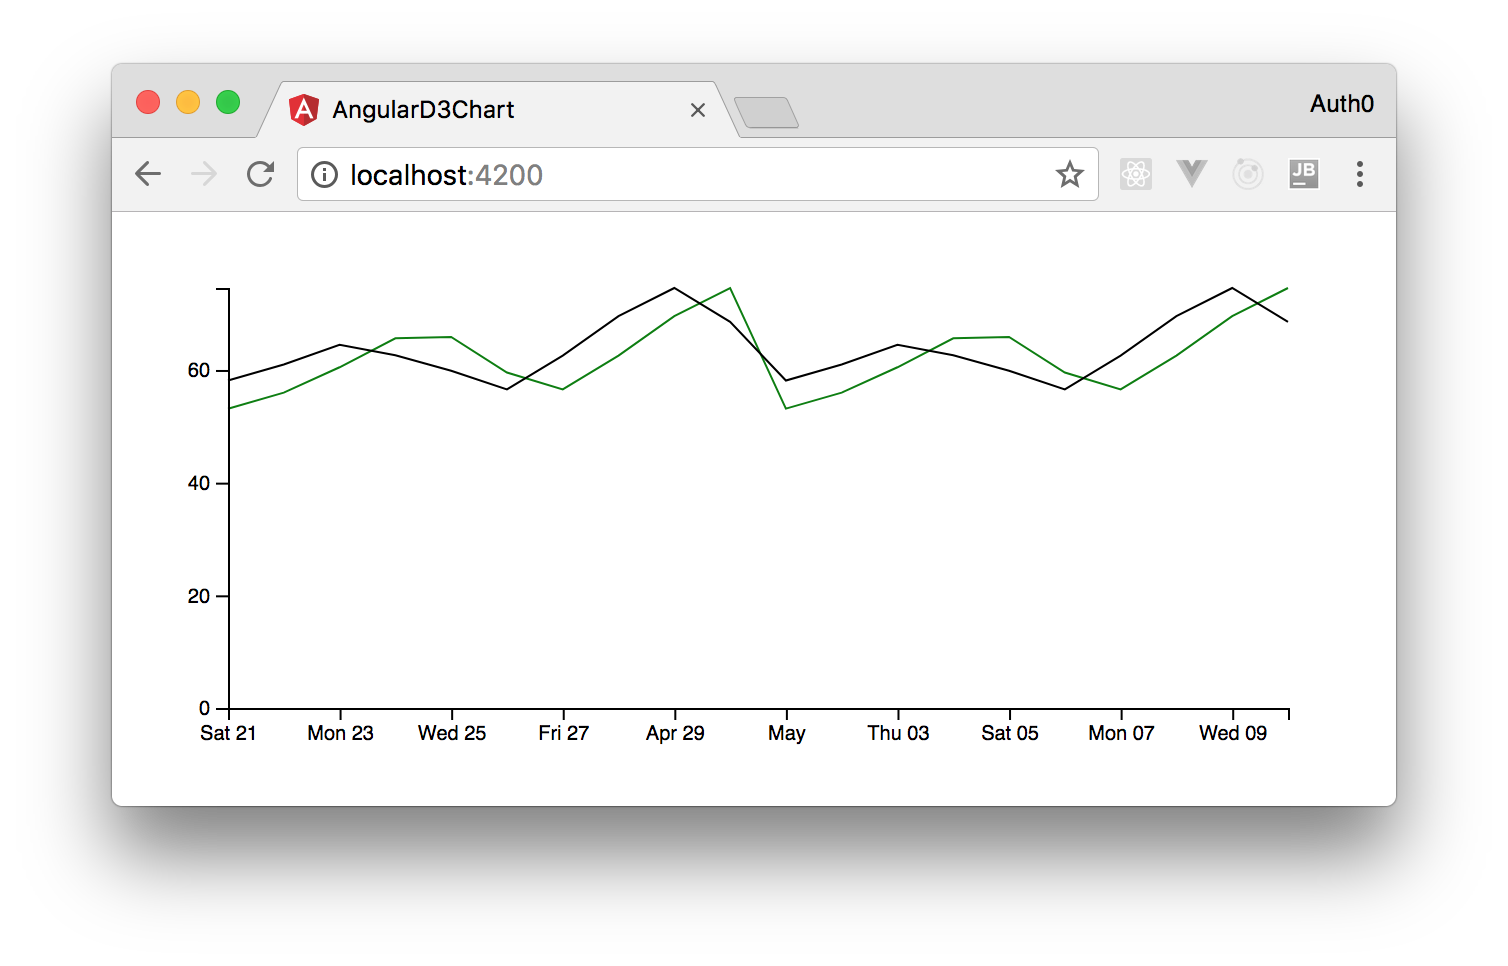 Showing a D3 chart with static data in an Angular application.